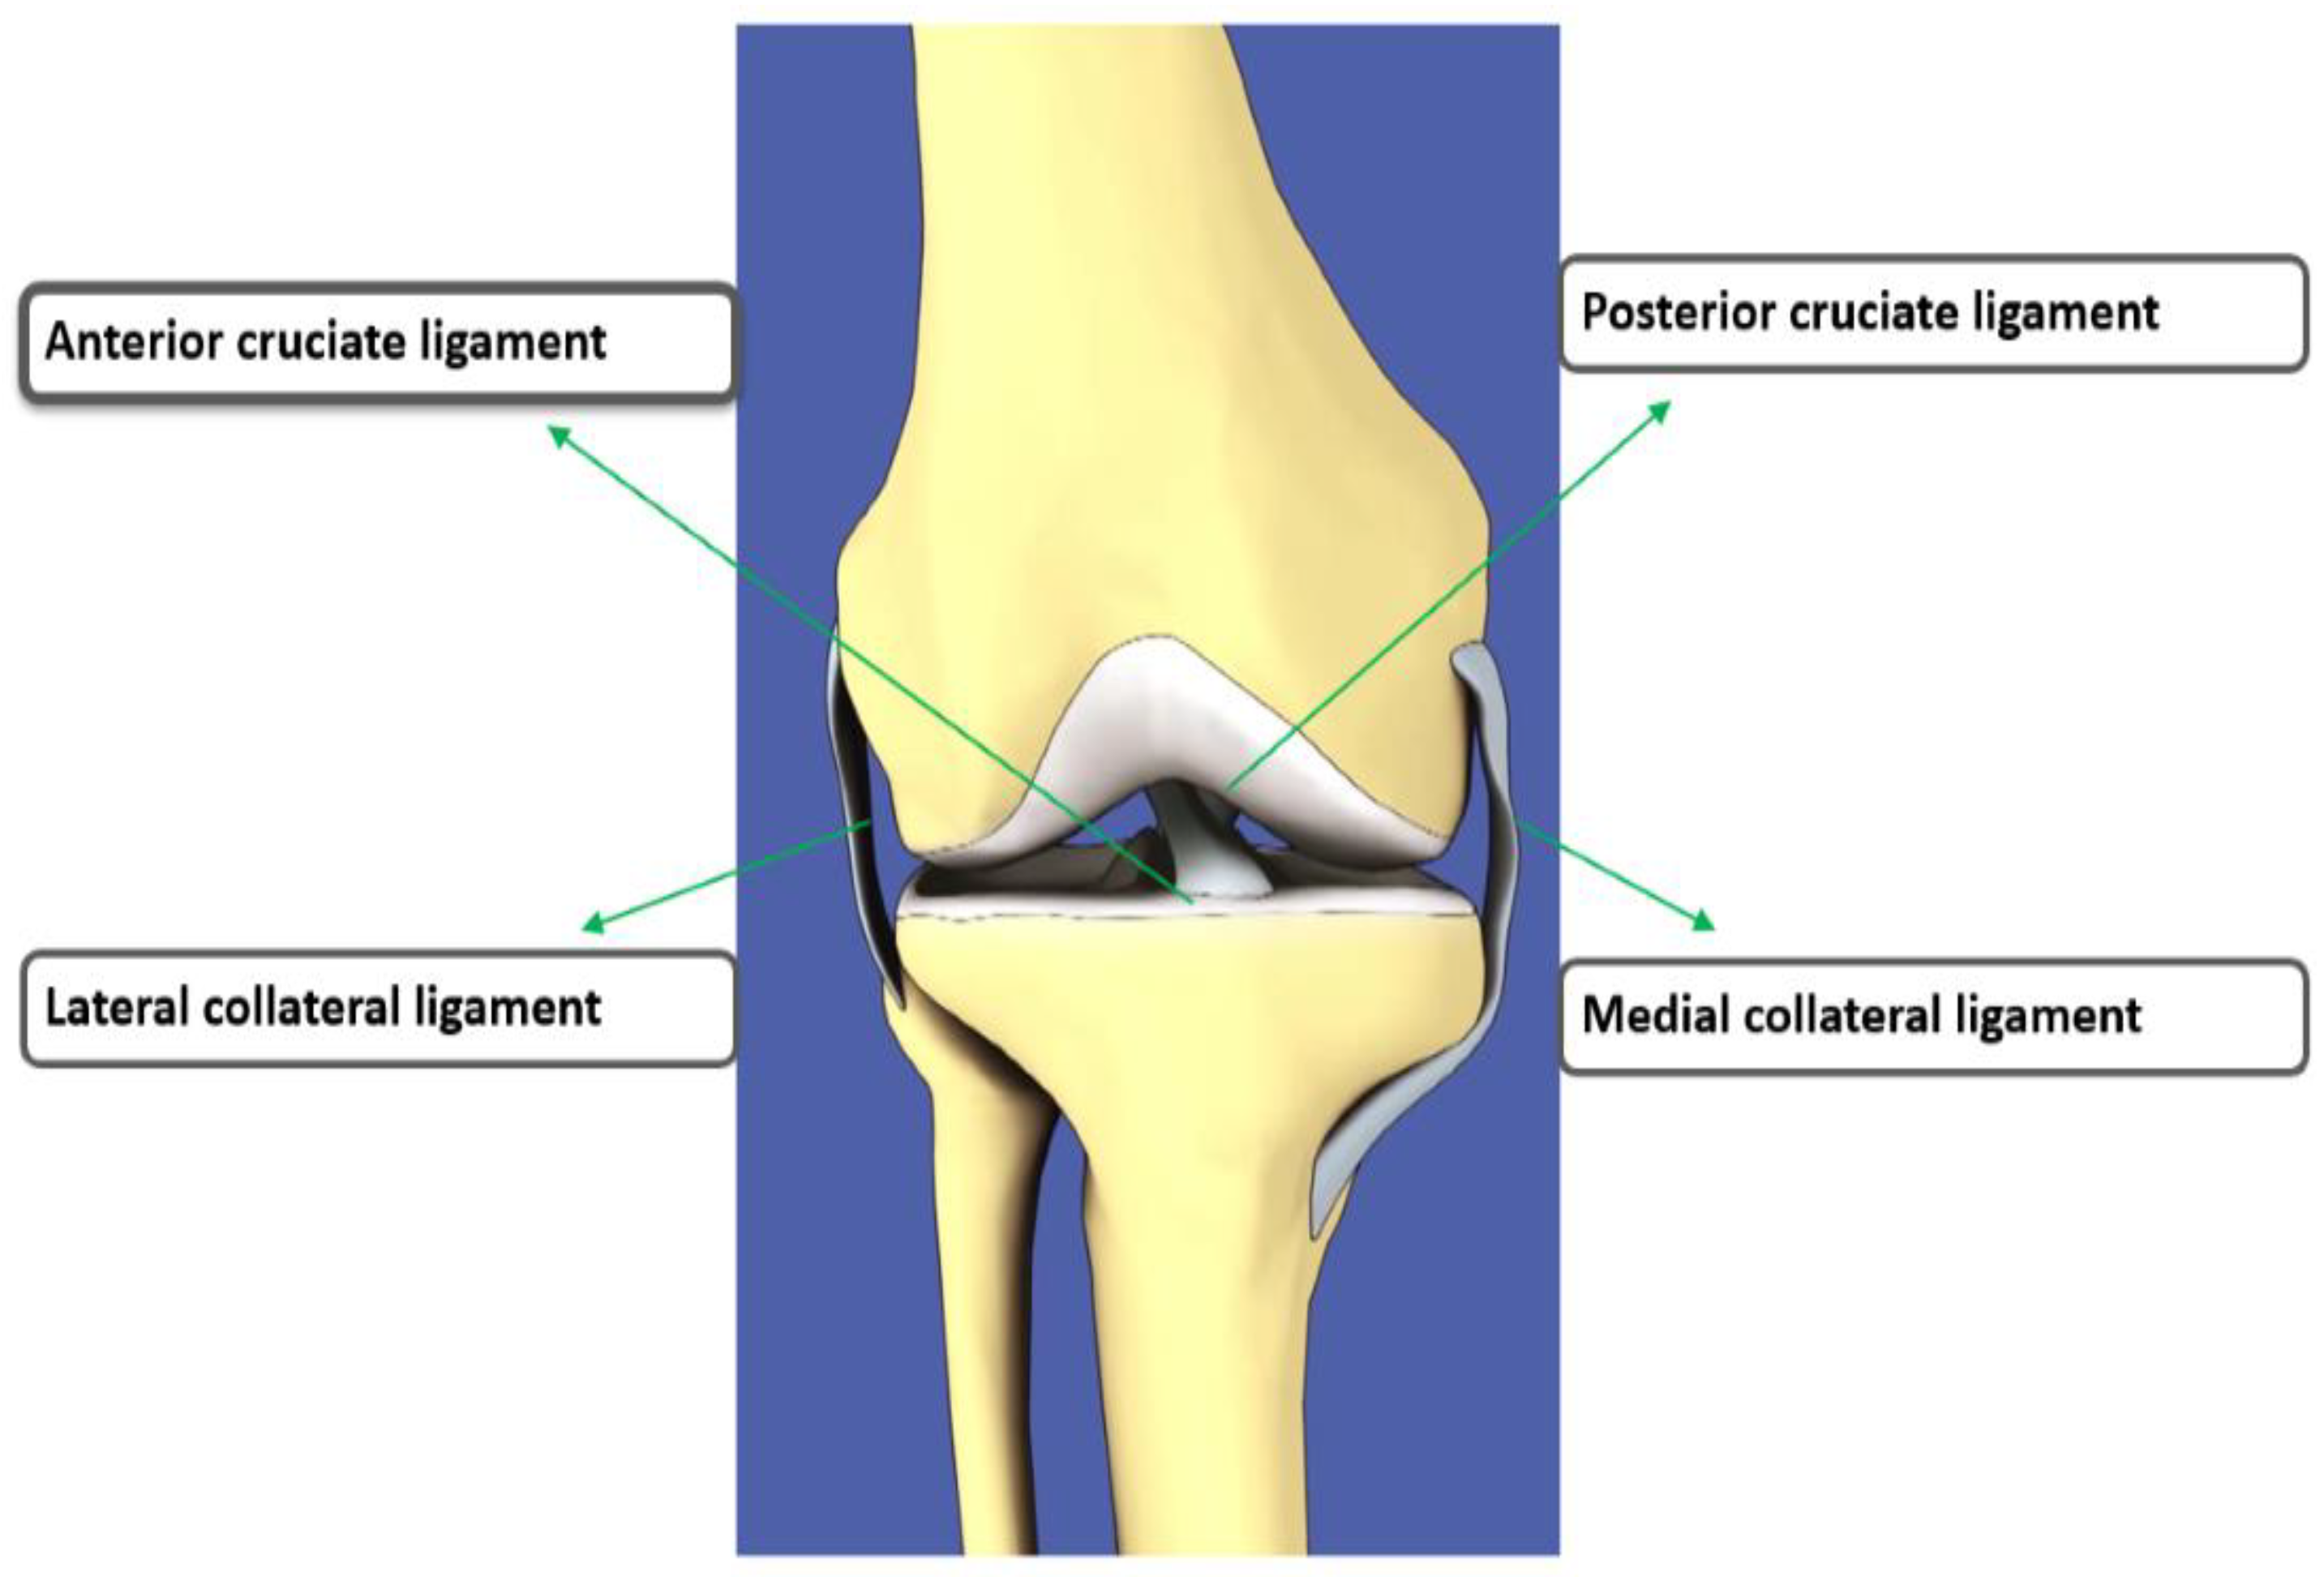 Diagnostics Free Full Text Efficient Detection Of Knee Anterior Cruciate Ligament From Magnetic Resonance Imaging Using Deep Learning Approach